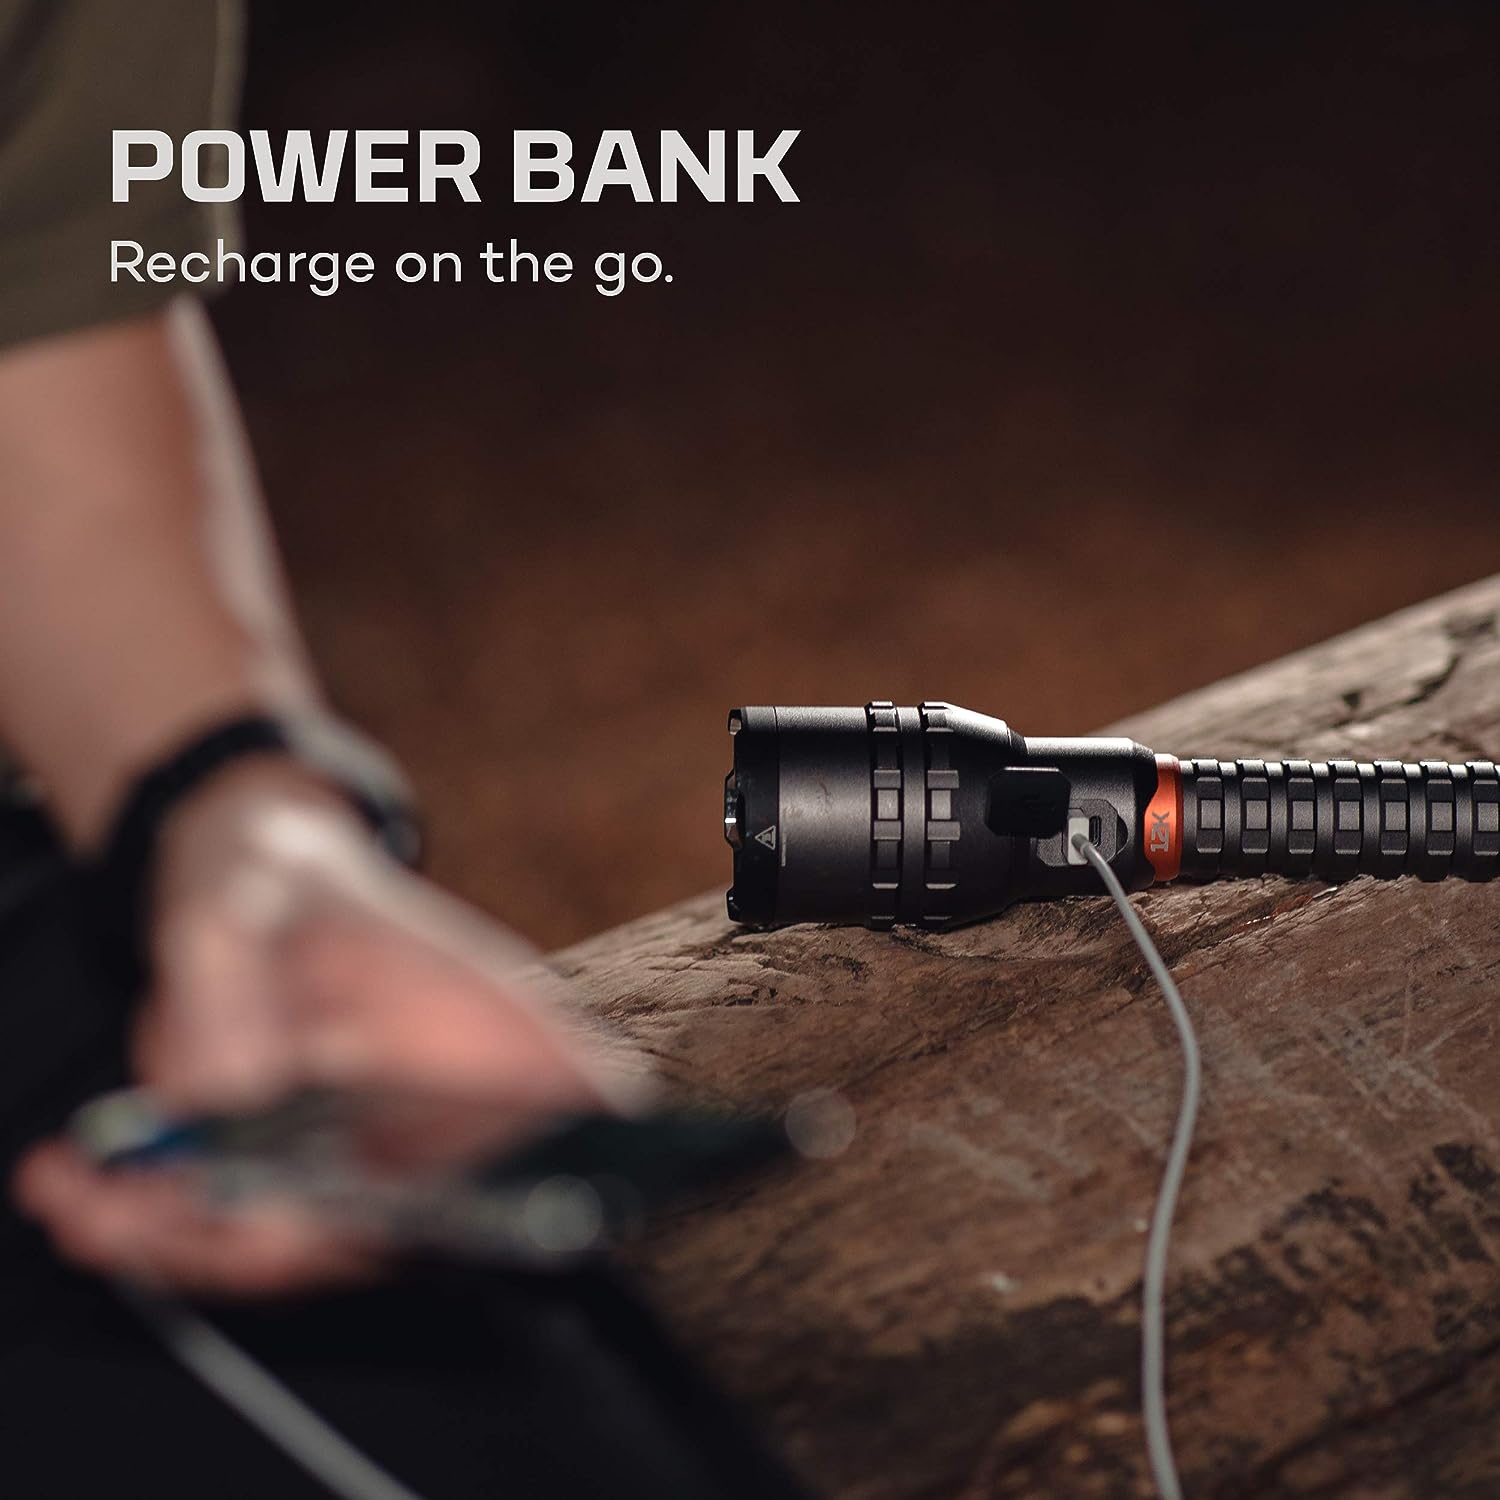 NEBO 12000 Rechargeable Flashlight with 2x Zoom, 5 Light Modes, Waterproof (IP67), and Power Bank, Bright Flashlight for Everday Carry, Hunting, Camping